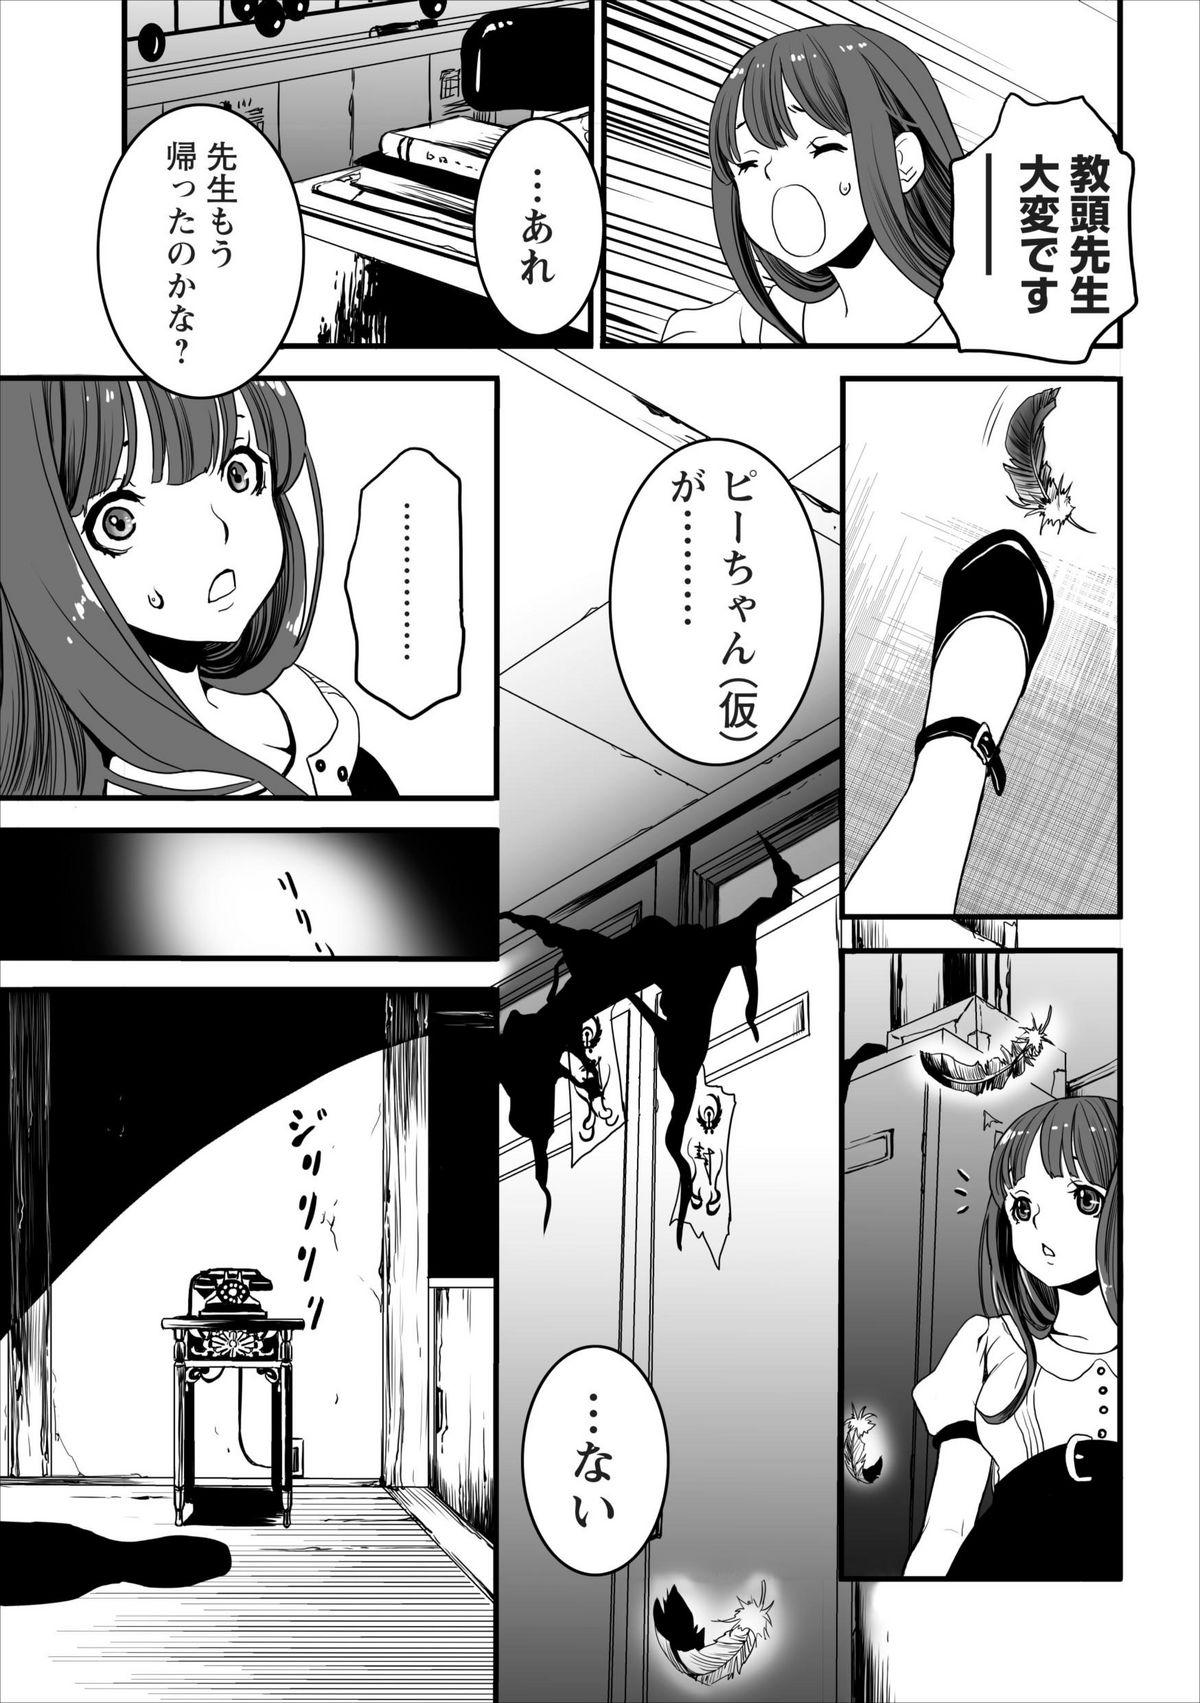 Submissive Oni Momo Generation ch.2 Thuylinh - Page 3